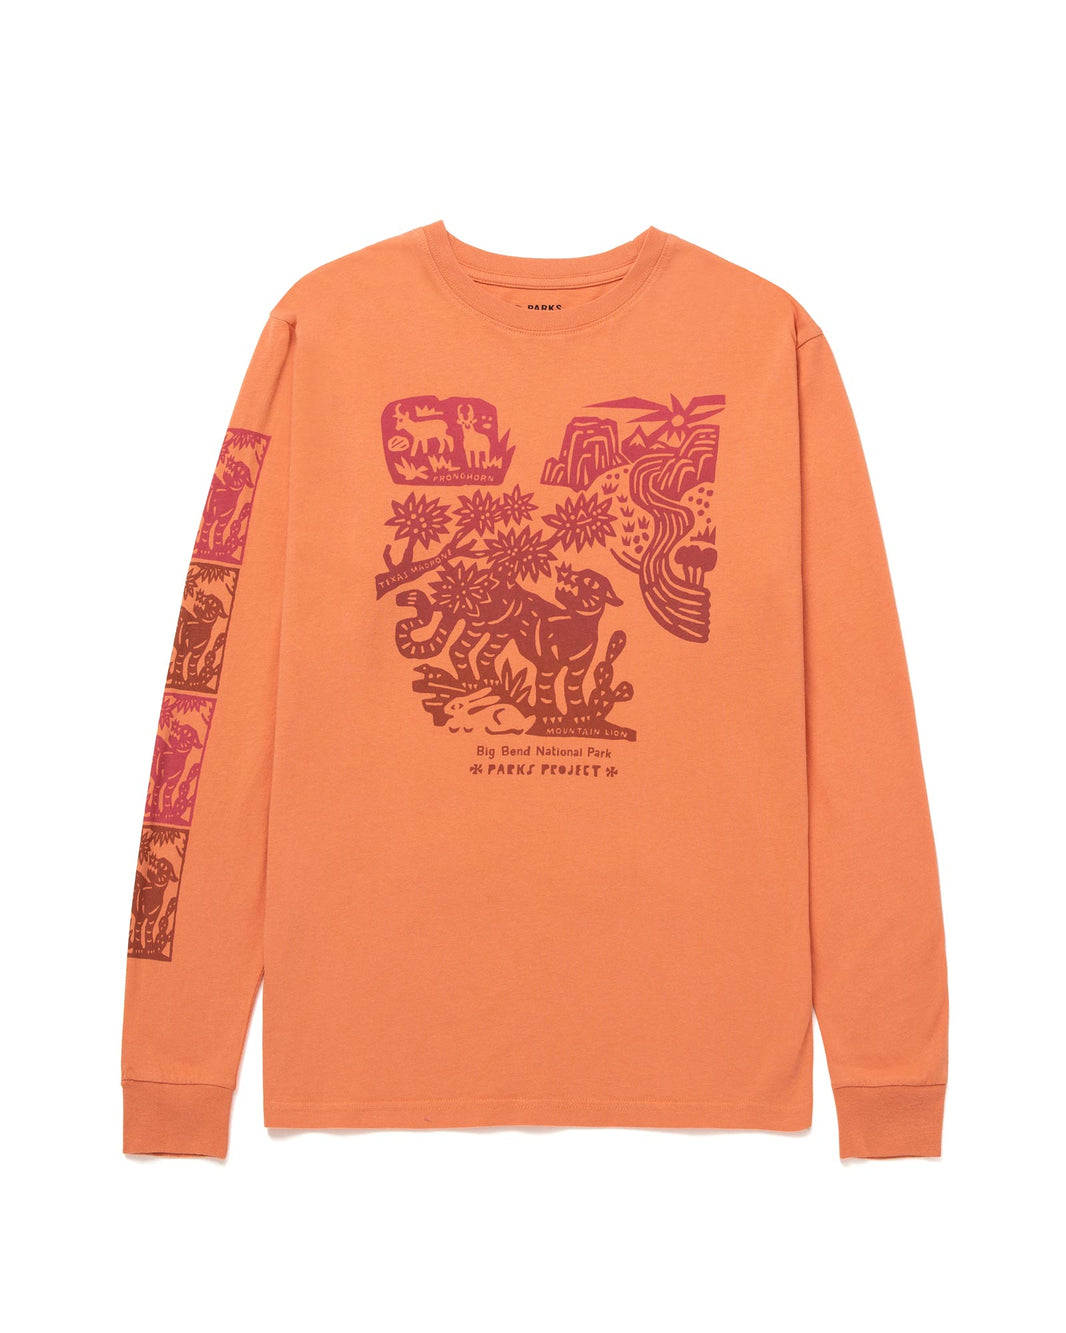 Parks Project | Shop Long Sleeves Collection